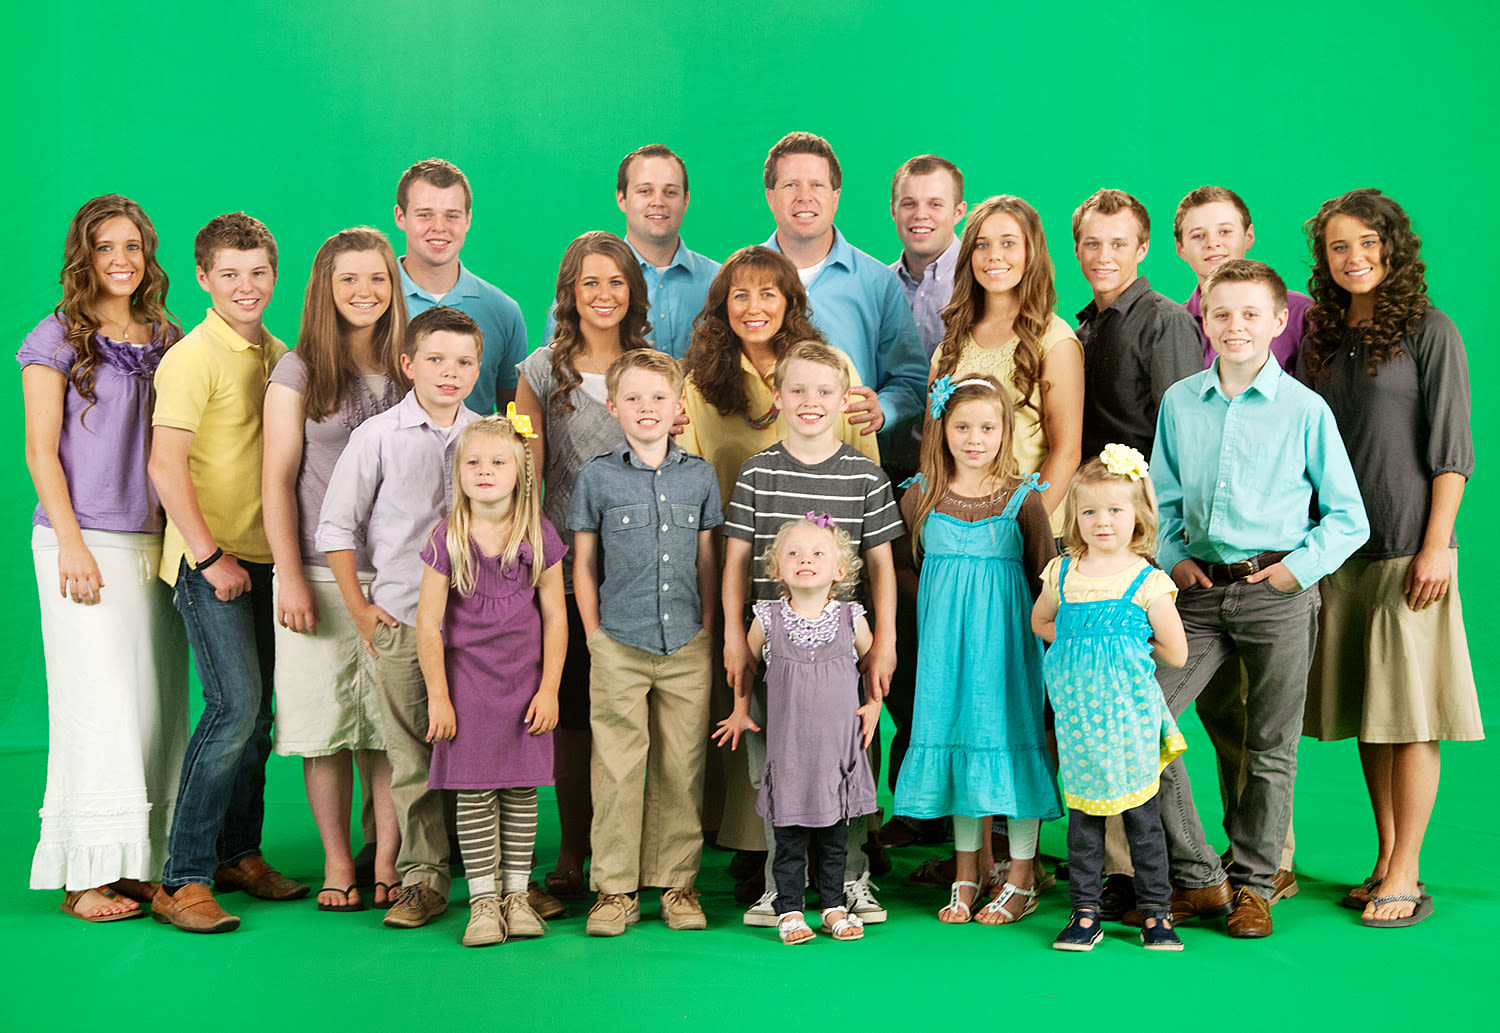 Duggar Family Photo Album: Get to Know Jim Bob and Michelle Duggar and Their 19 Kids